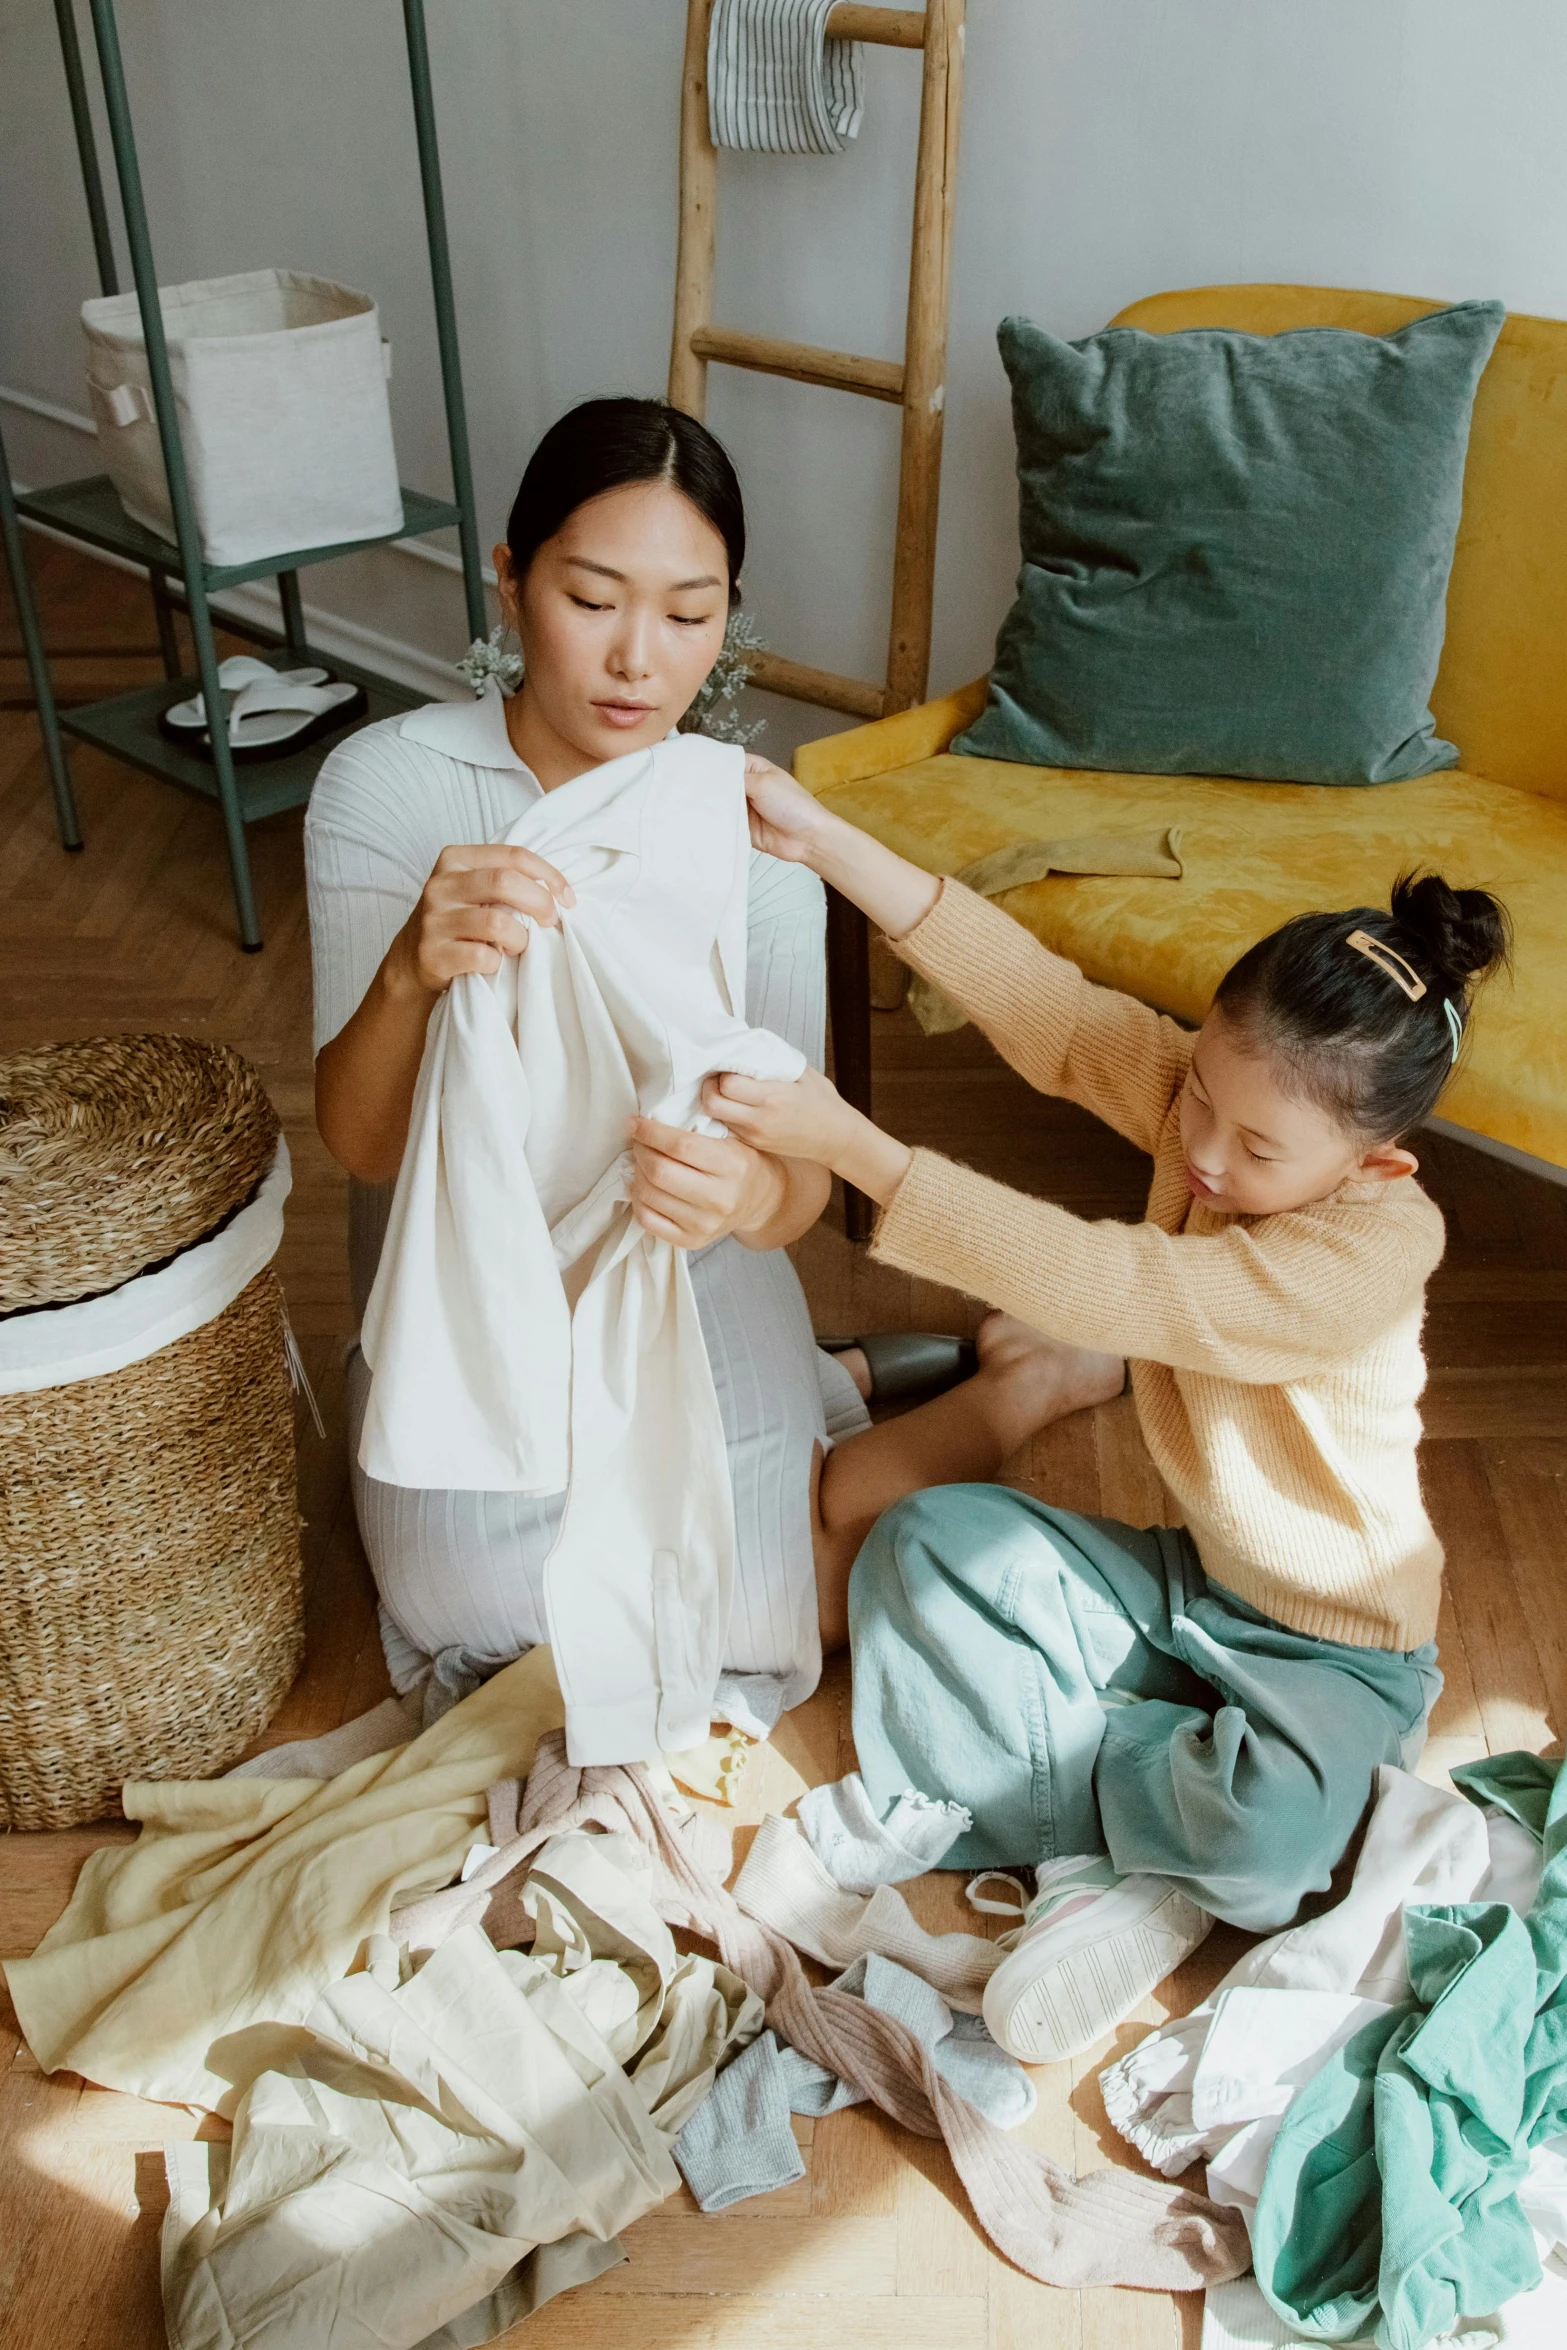 a woman sitting on the floor next to a little girl, touching her clothes, sustainable materials, asian descent, throw